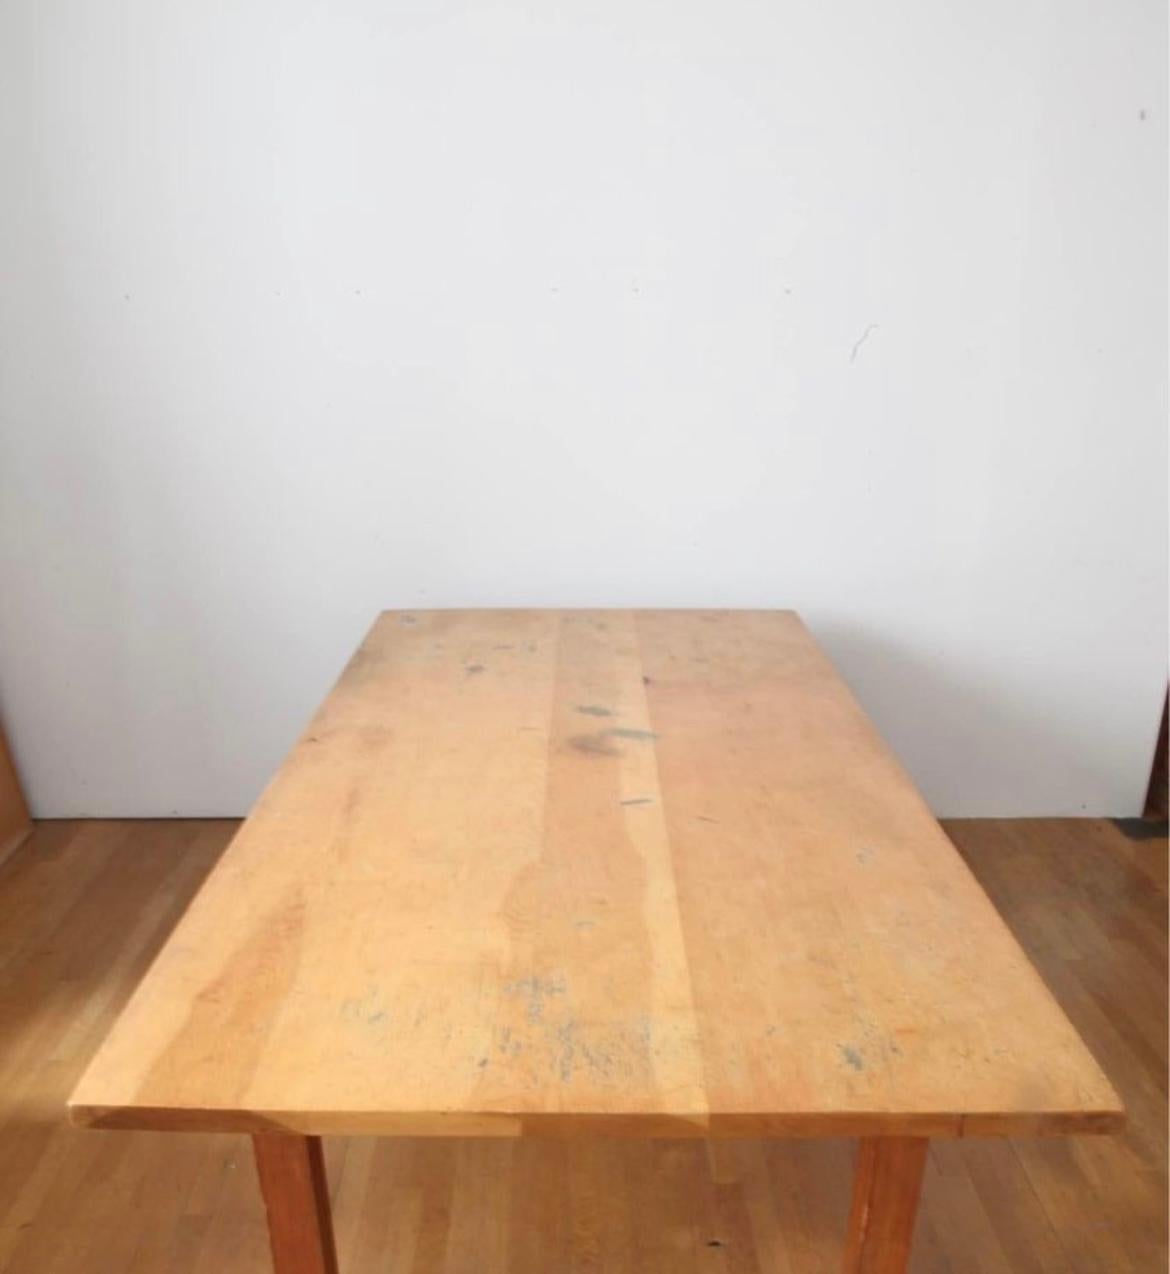 donald judd dining table